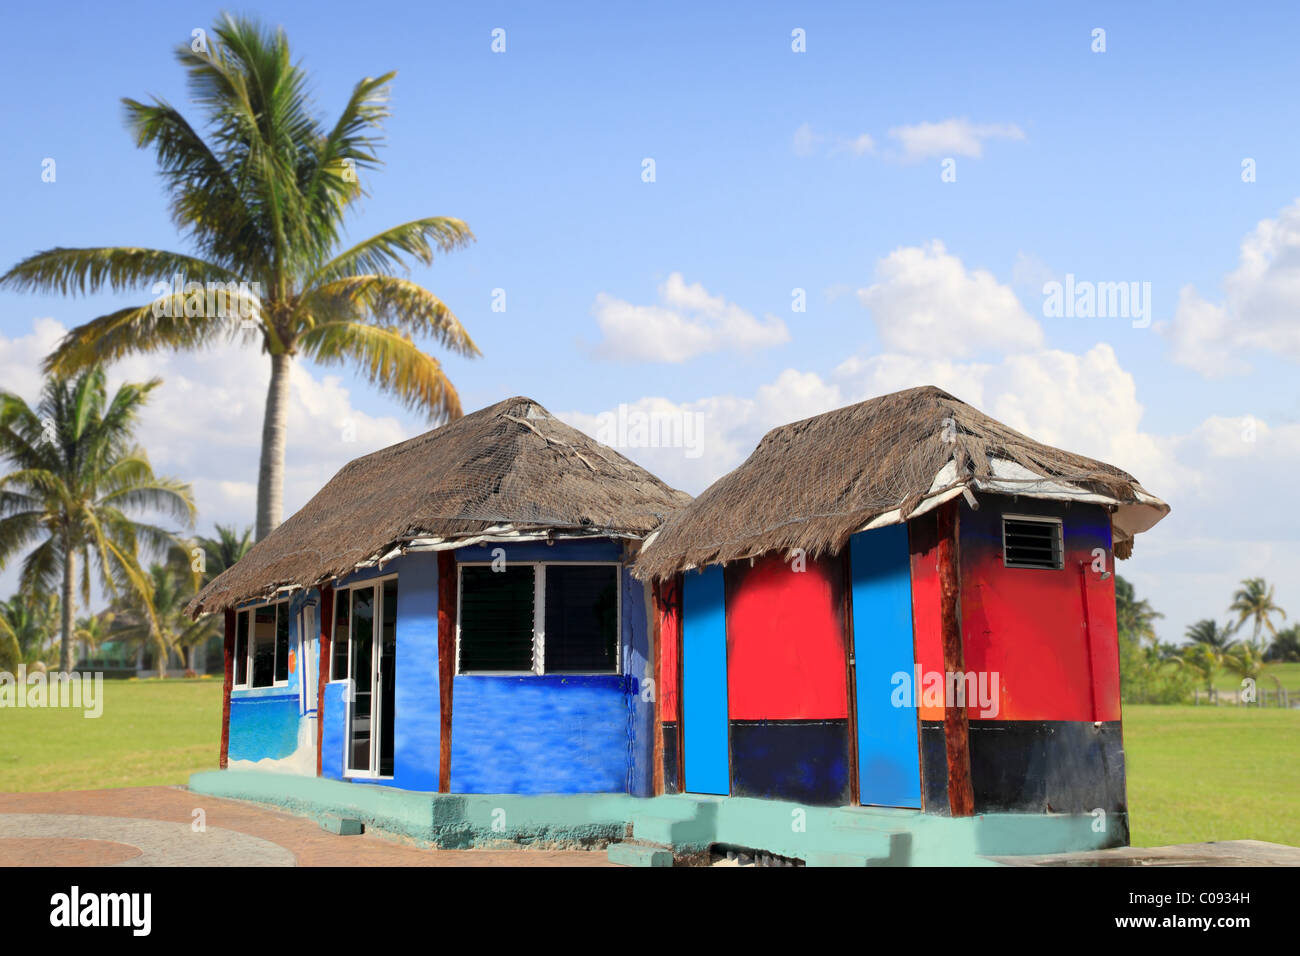 hut palapa colorful with tropical cabin and palm trees Stock Photo